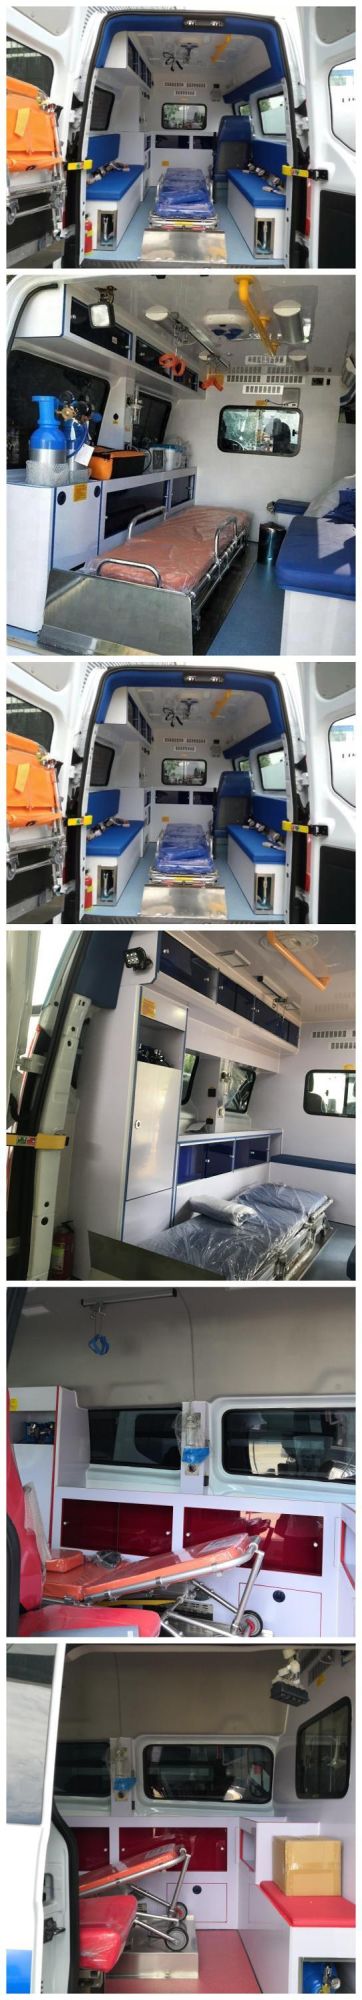 Foton First Aid Rescue Ambulance Car Medical Vehicle for Hospital Use